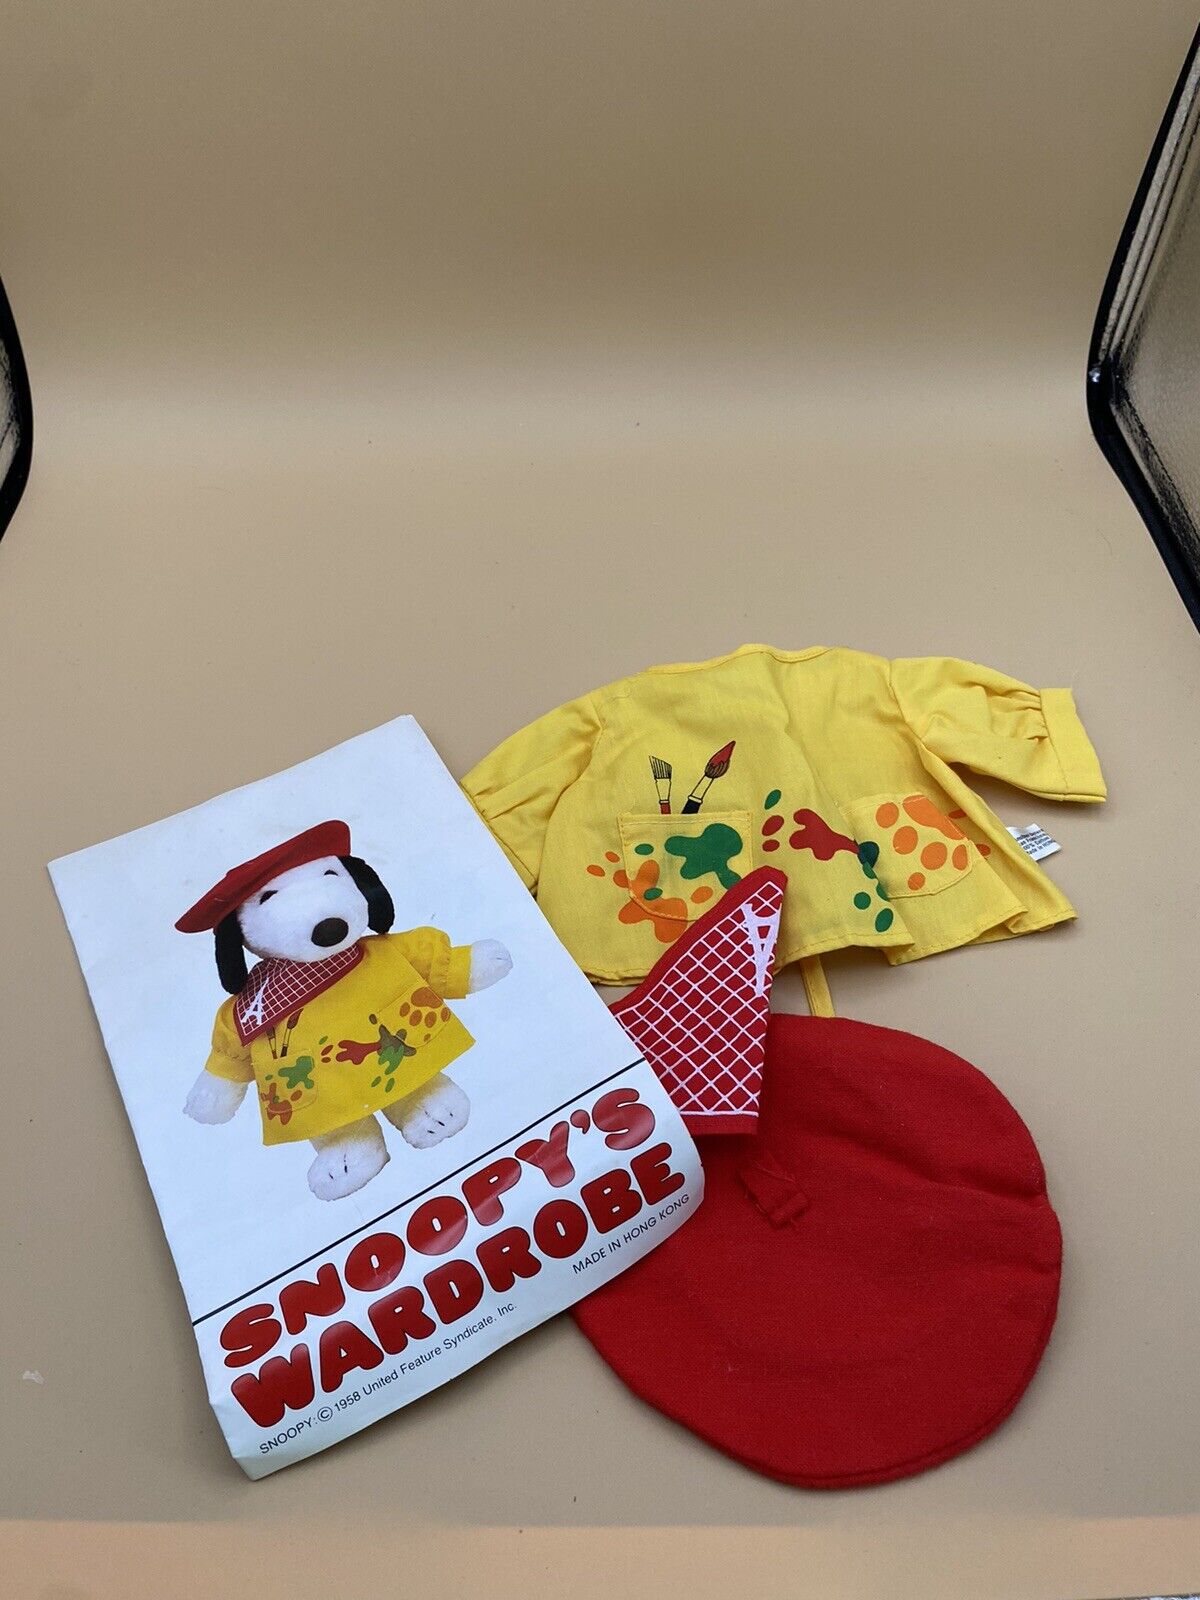 Snoopy’s Wardrobe ARTIST outfit w/red beret & scarf Baby Plush Snoopy #0821 1958